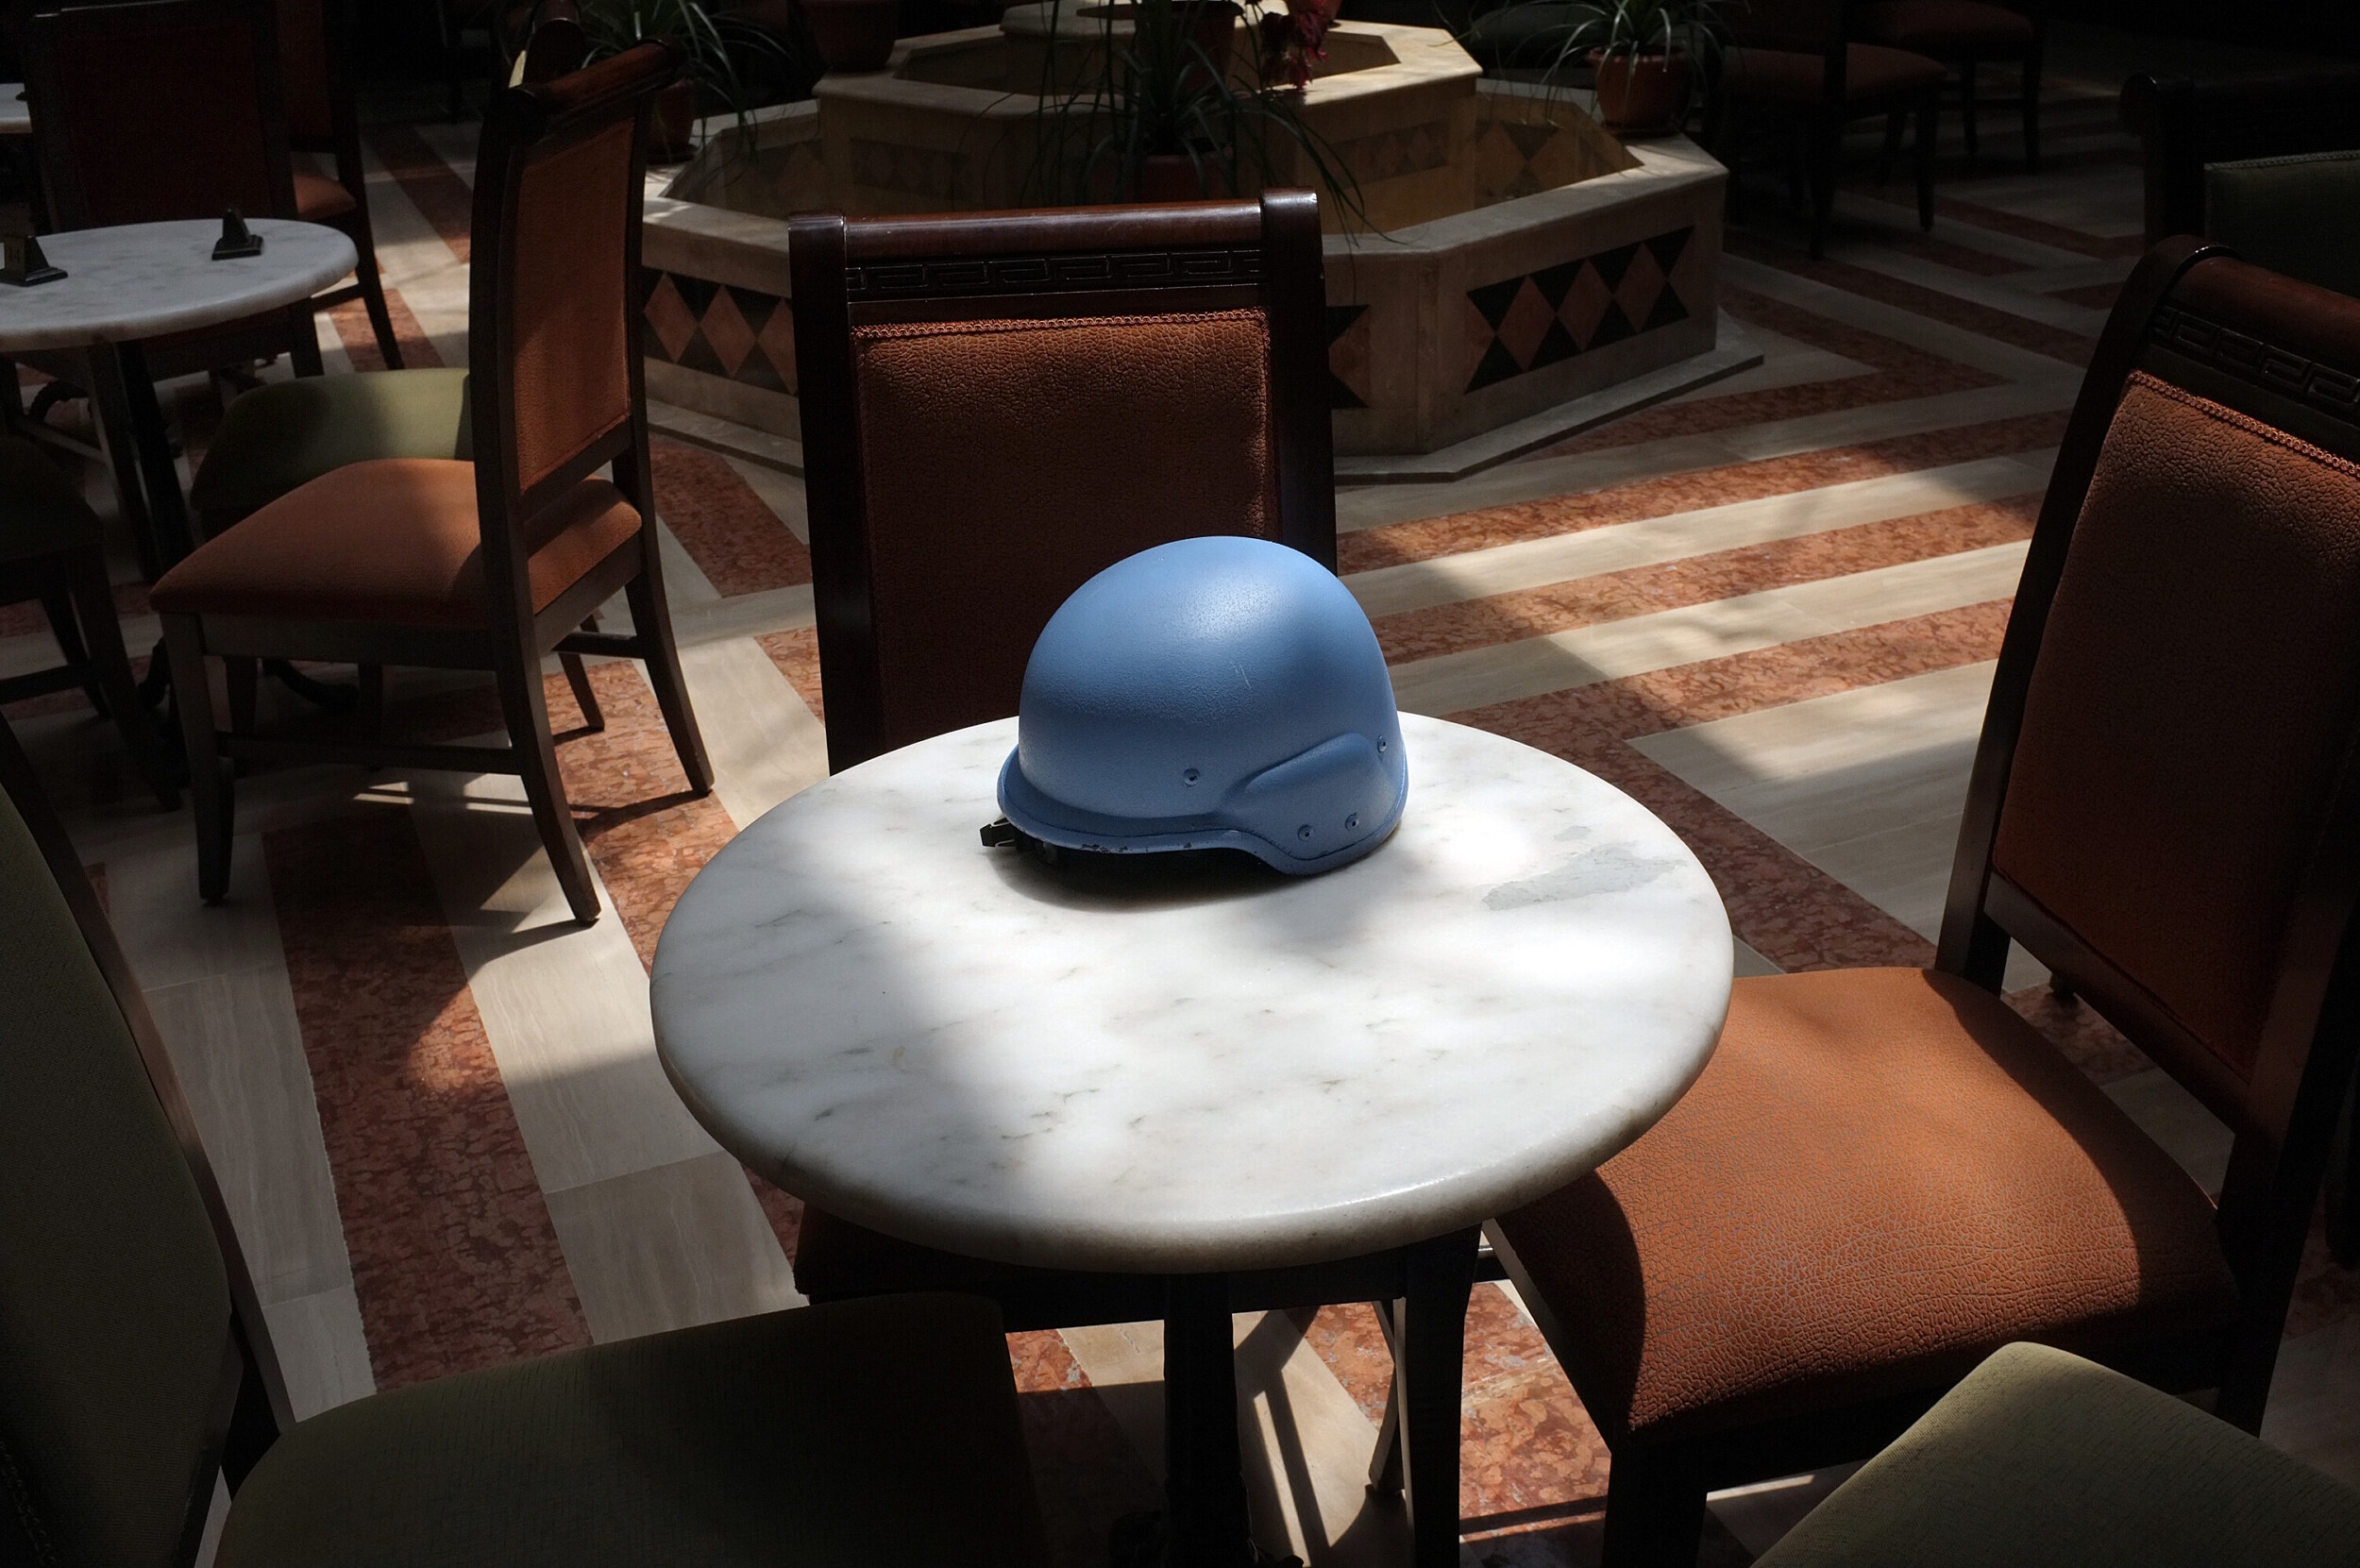 The helmet of a UN observer in a hotel in Homs.